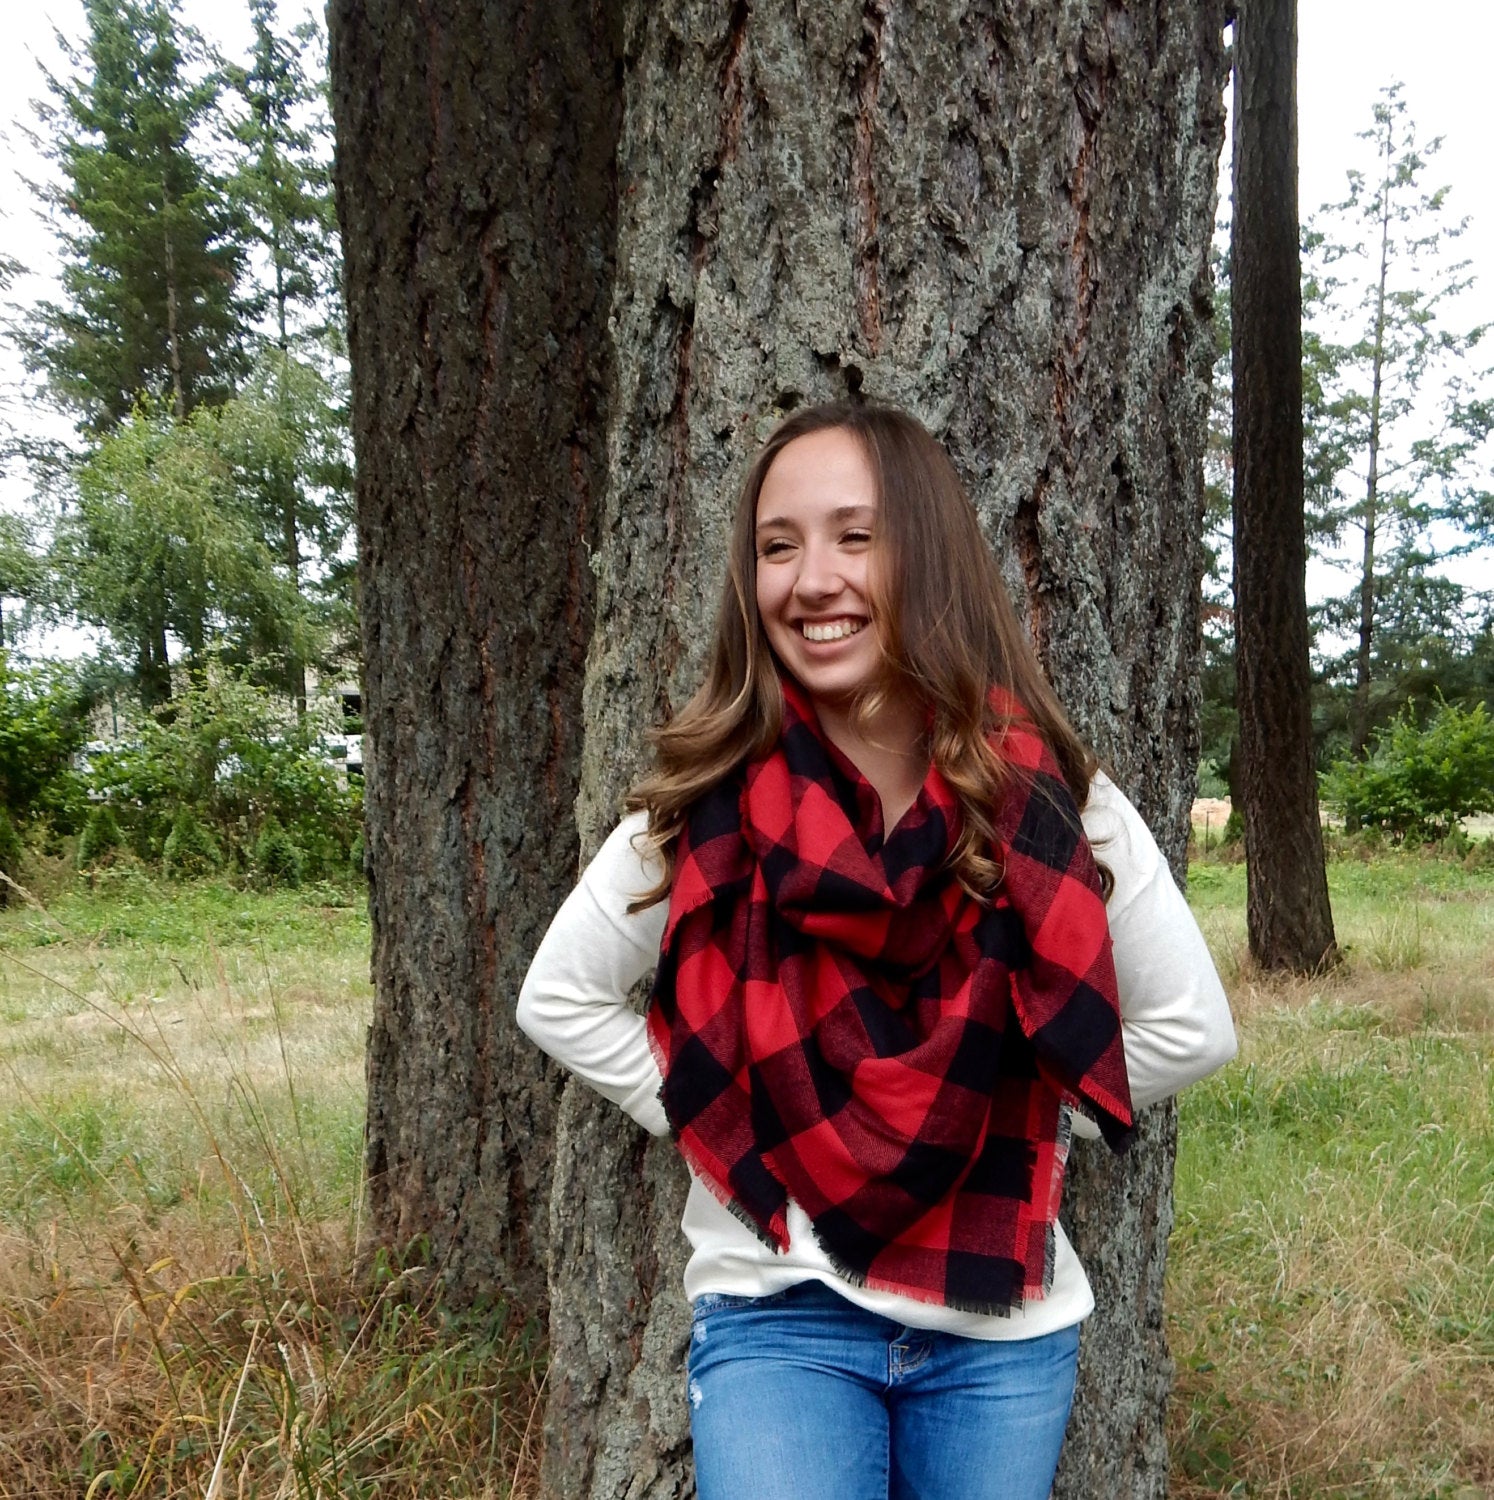 Buffalo Plaid Blanket Scarf in Large Red and Black Checks